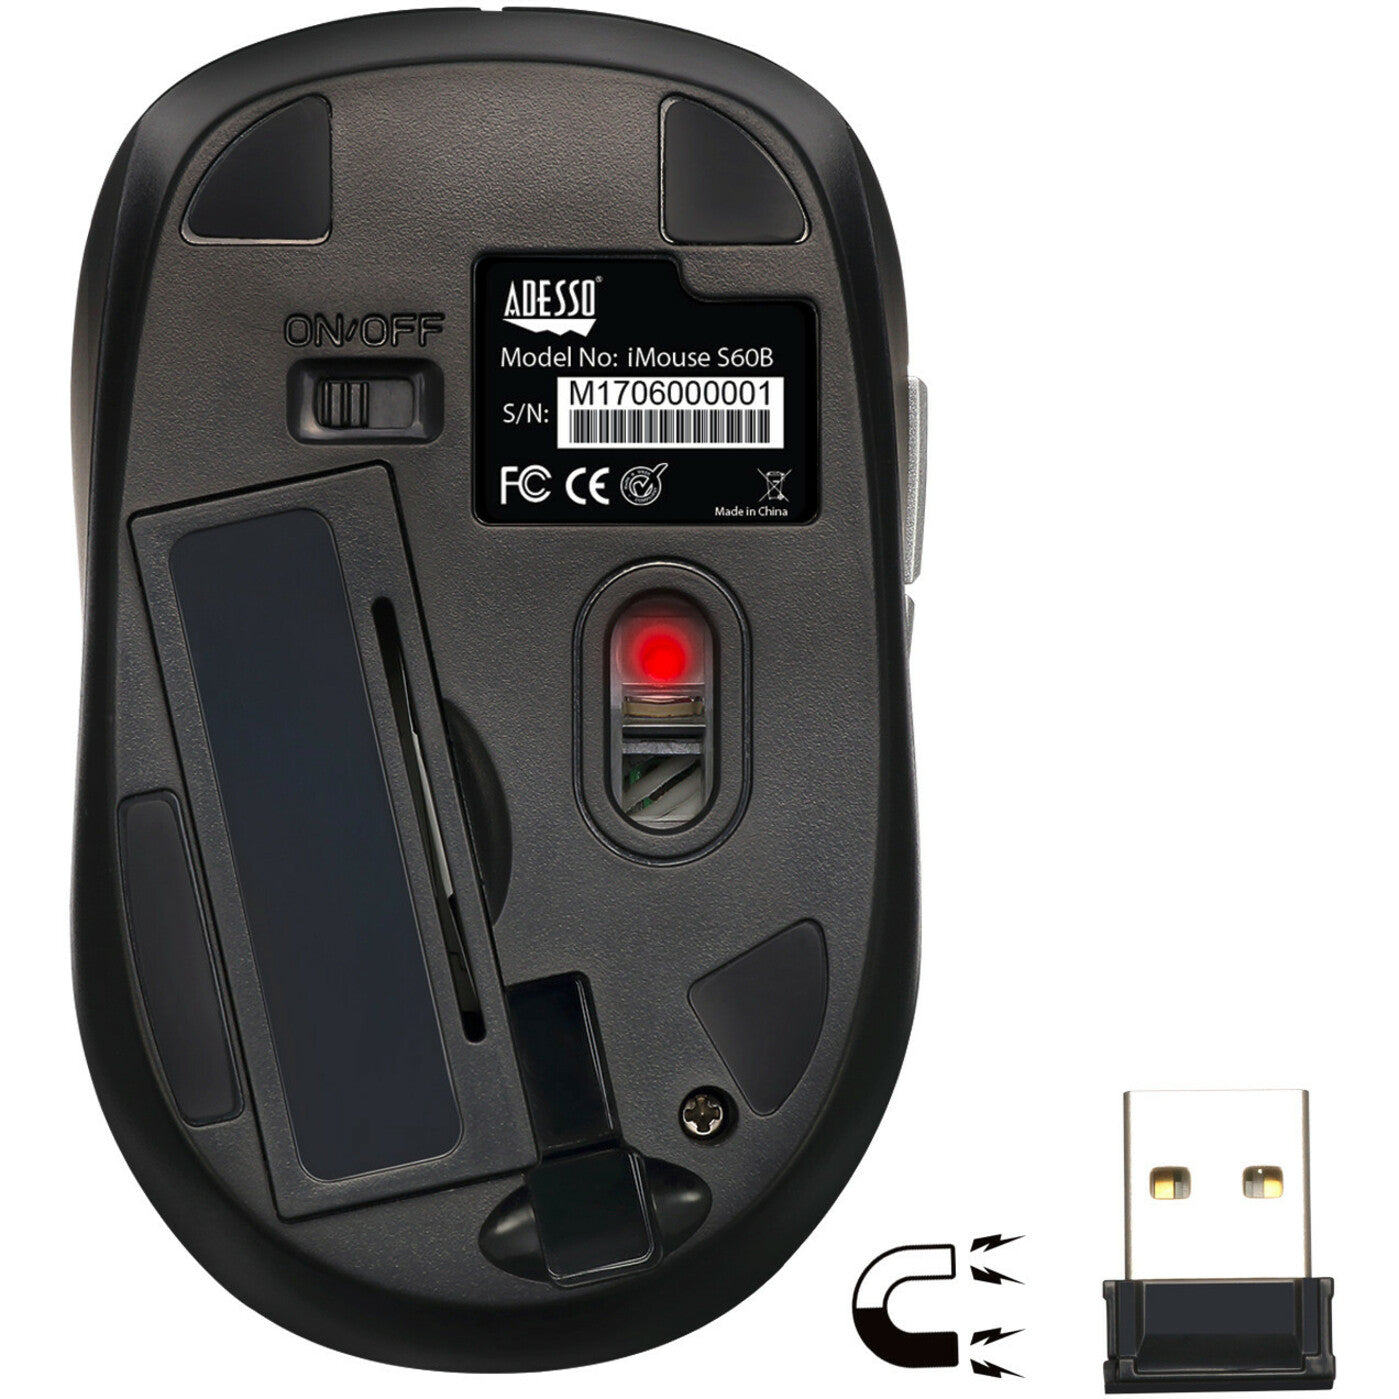 Adesso IMOUSES60B iMouse S60B - 2.4 GHz Wireless Programmable Nano Mouse, Ergonomic Fit, Tilt Wheel, 1600 dpi